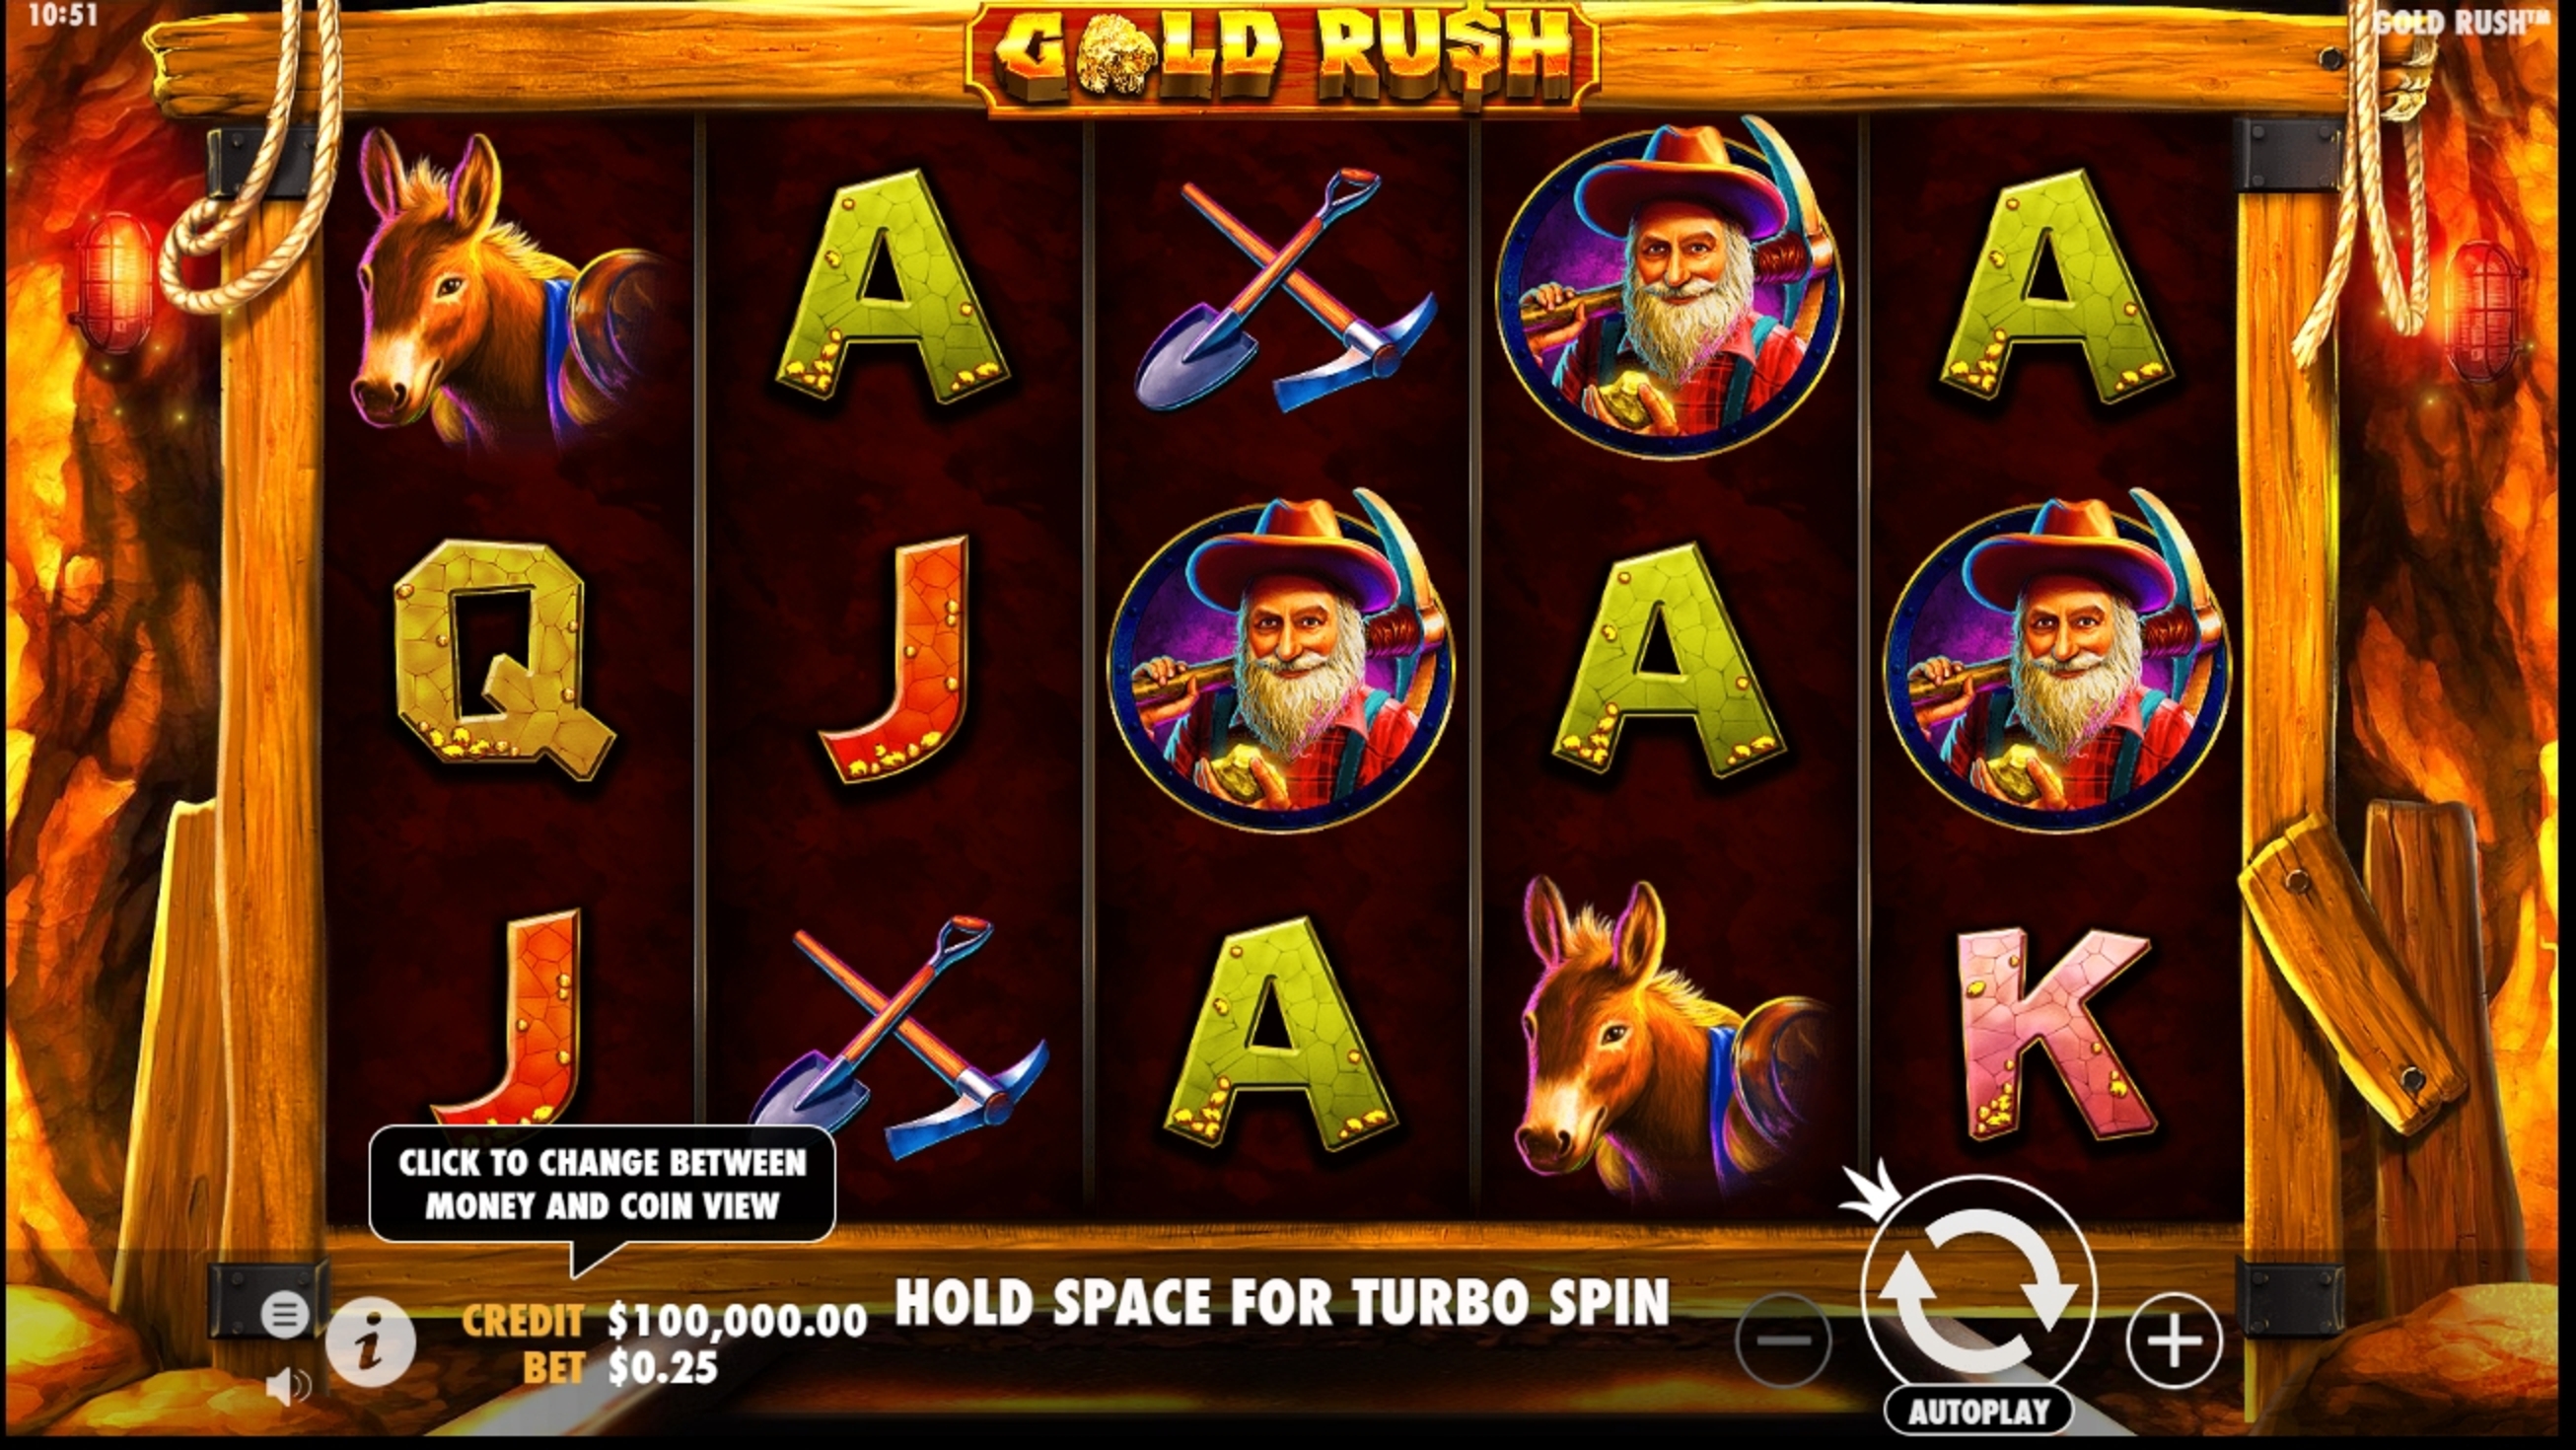 Reels in Gold Rush Slot Game by NetEnt